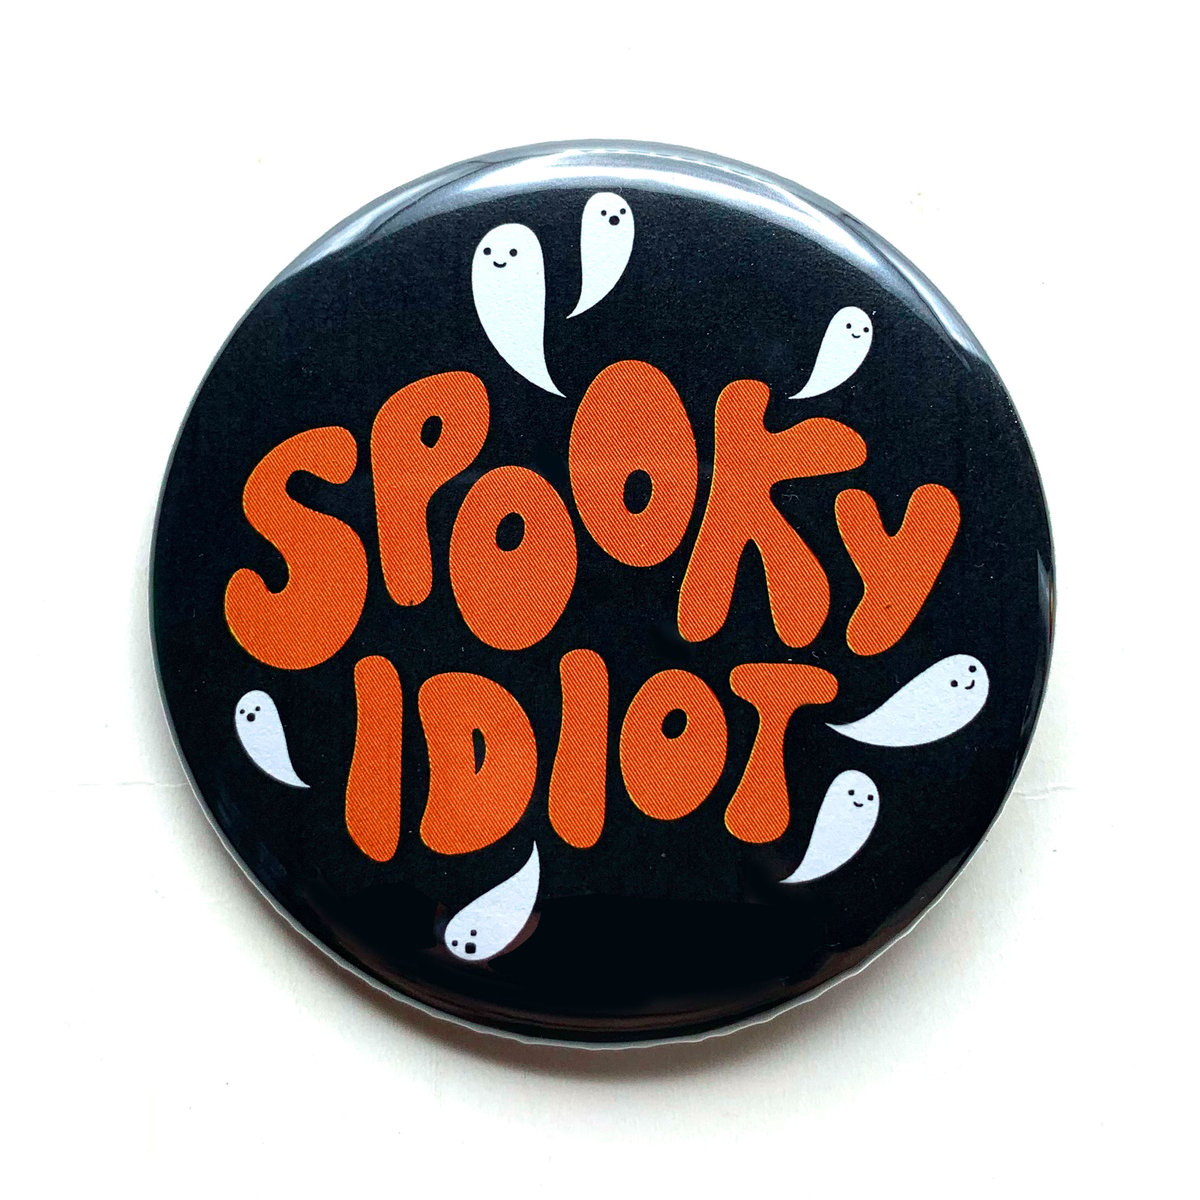 Image of Spooky Idiot Bottle Opener/ Button/ Magnet